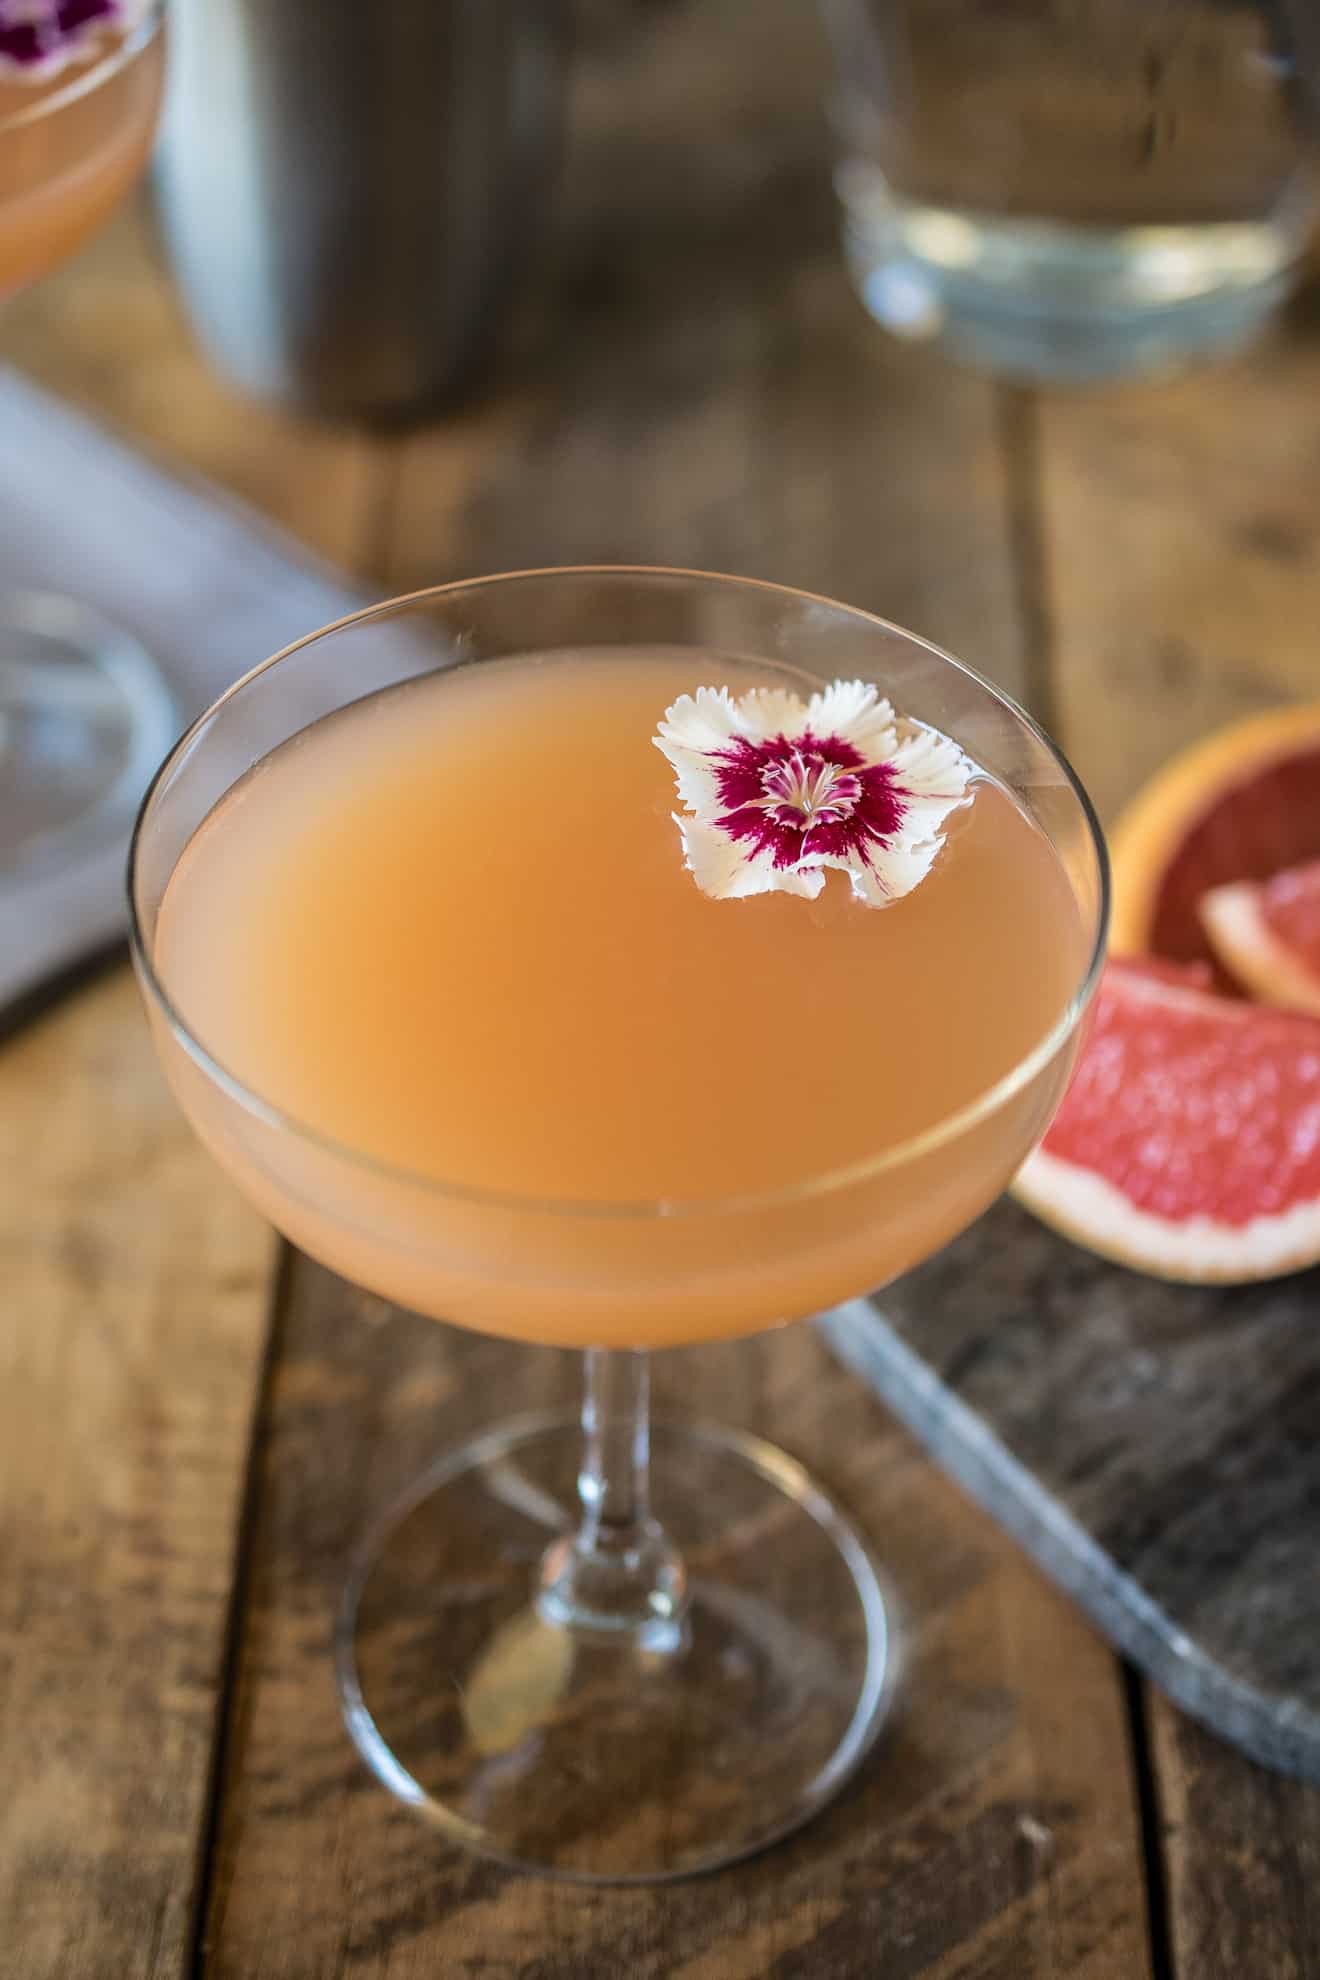 The drink from overhead showing the pretty red and white flower garnish